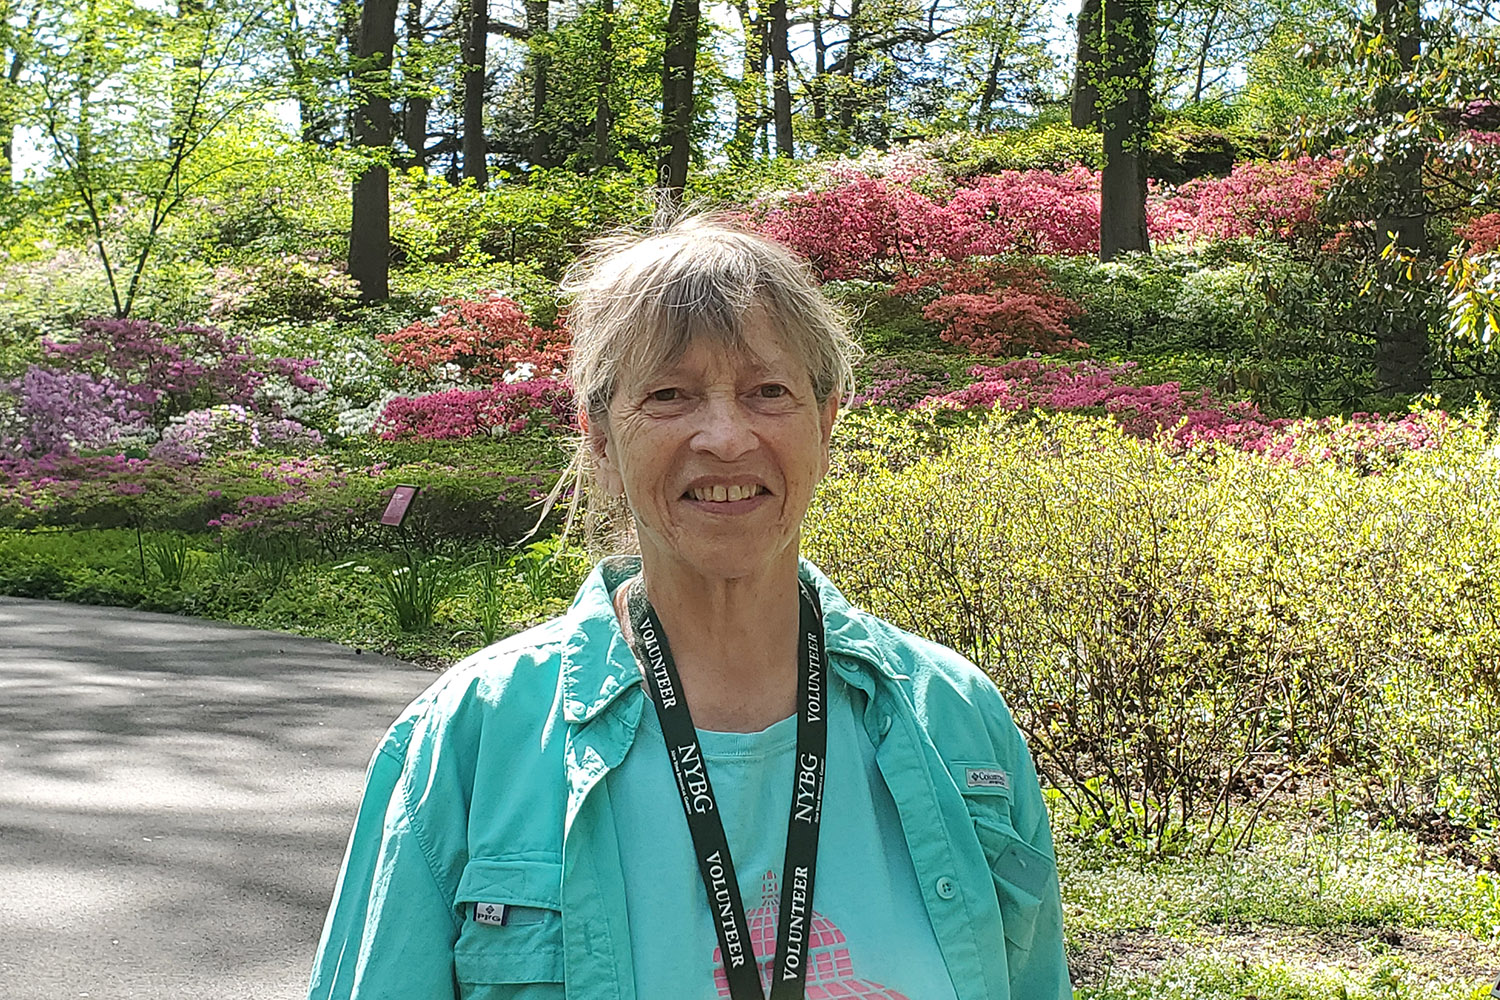 A woman in a sea green shirt poses for a photo in a garden full of pink flowers